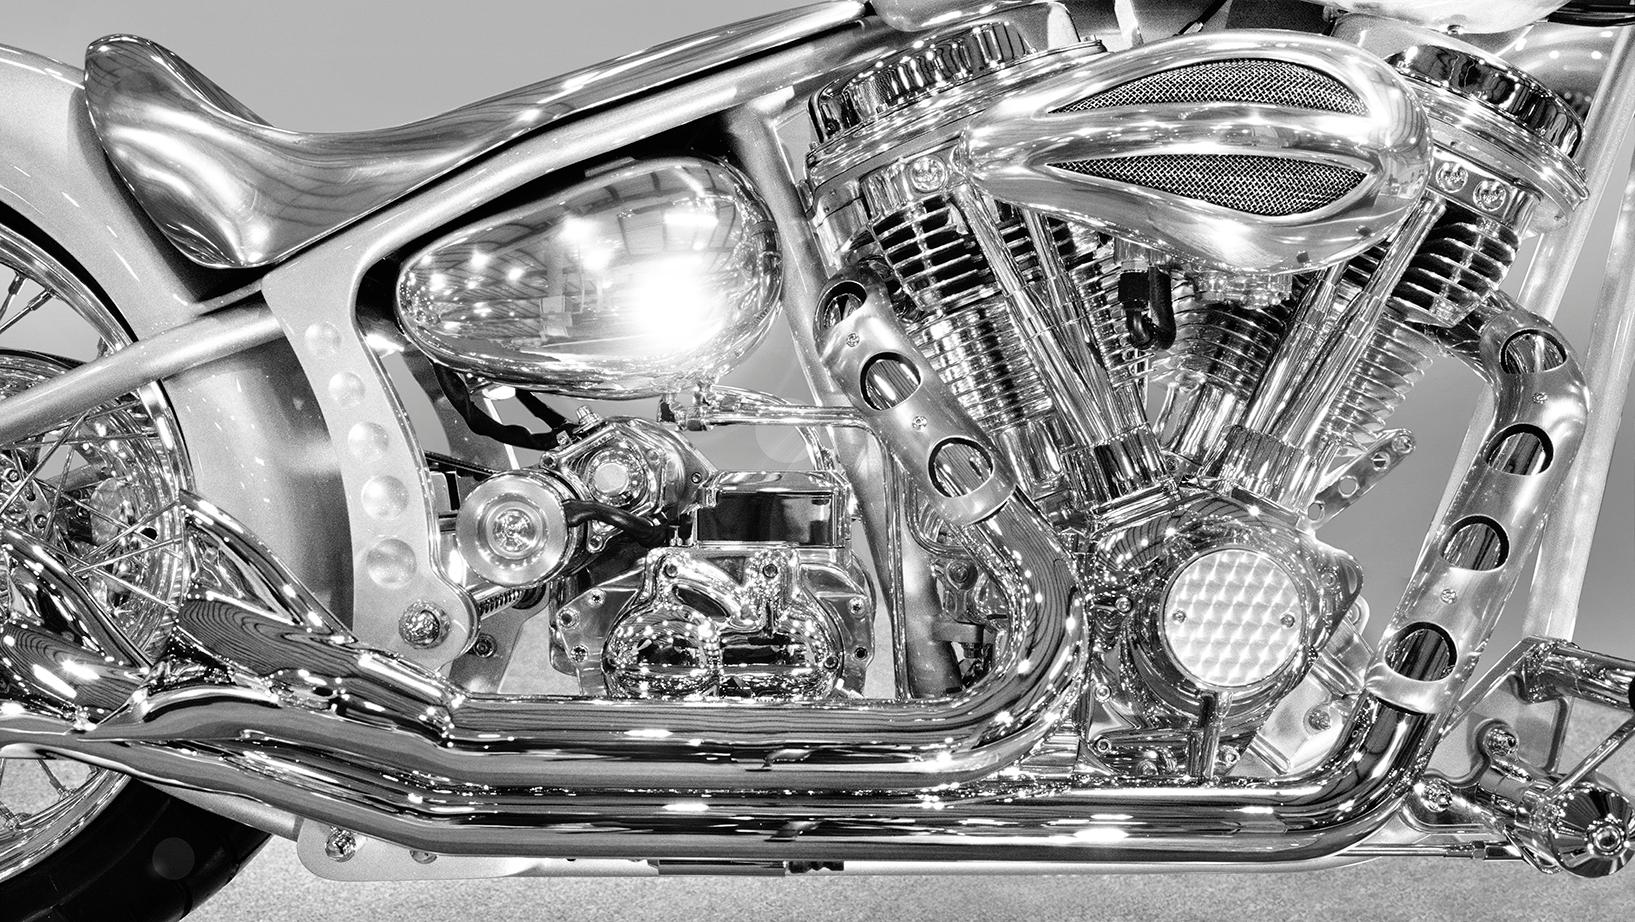 Chopper 2003 - large format photograph of iconic Harley Davidson chrome details